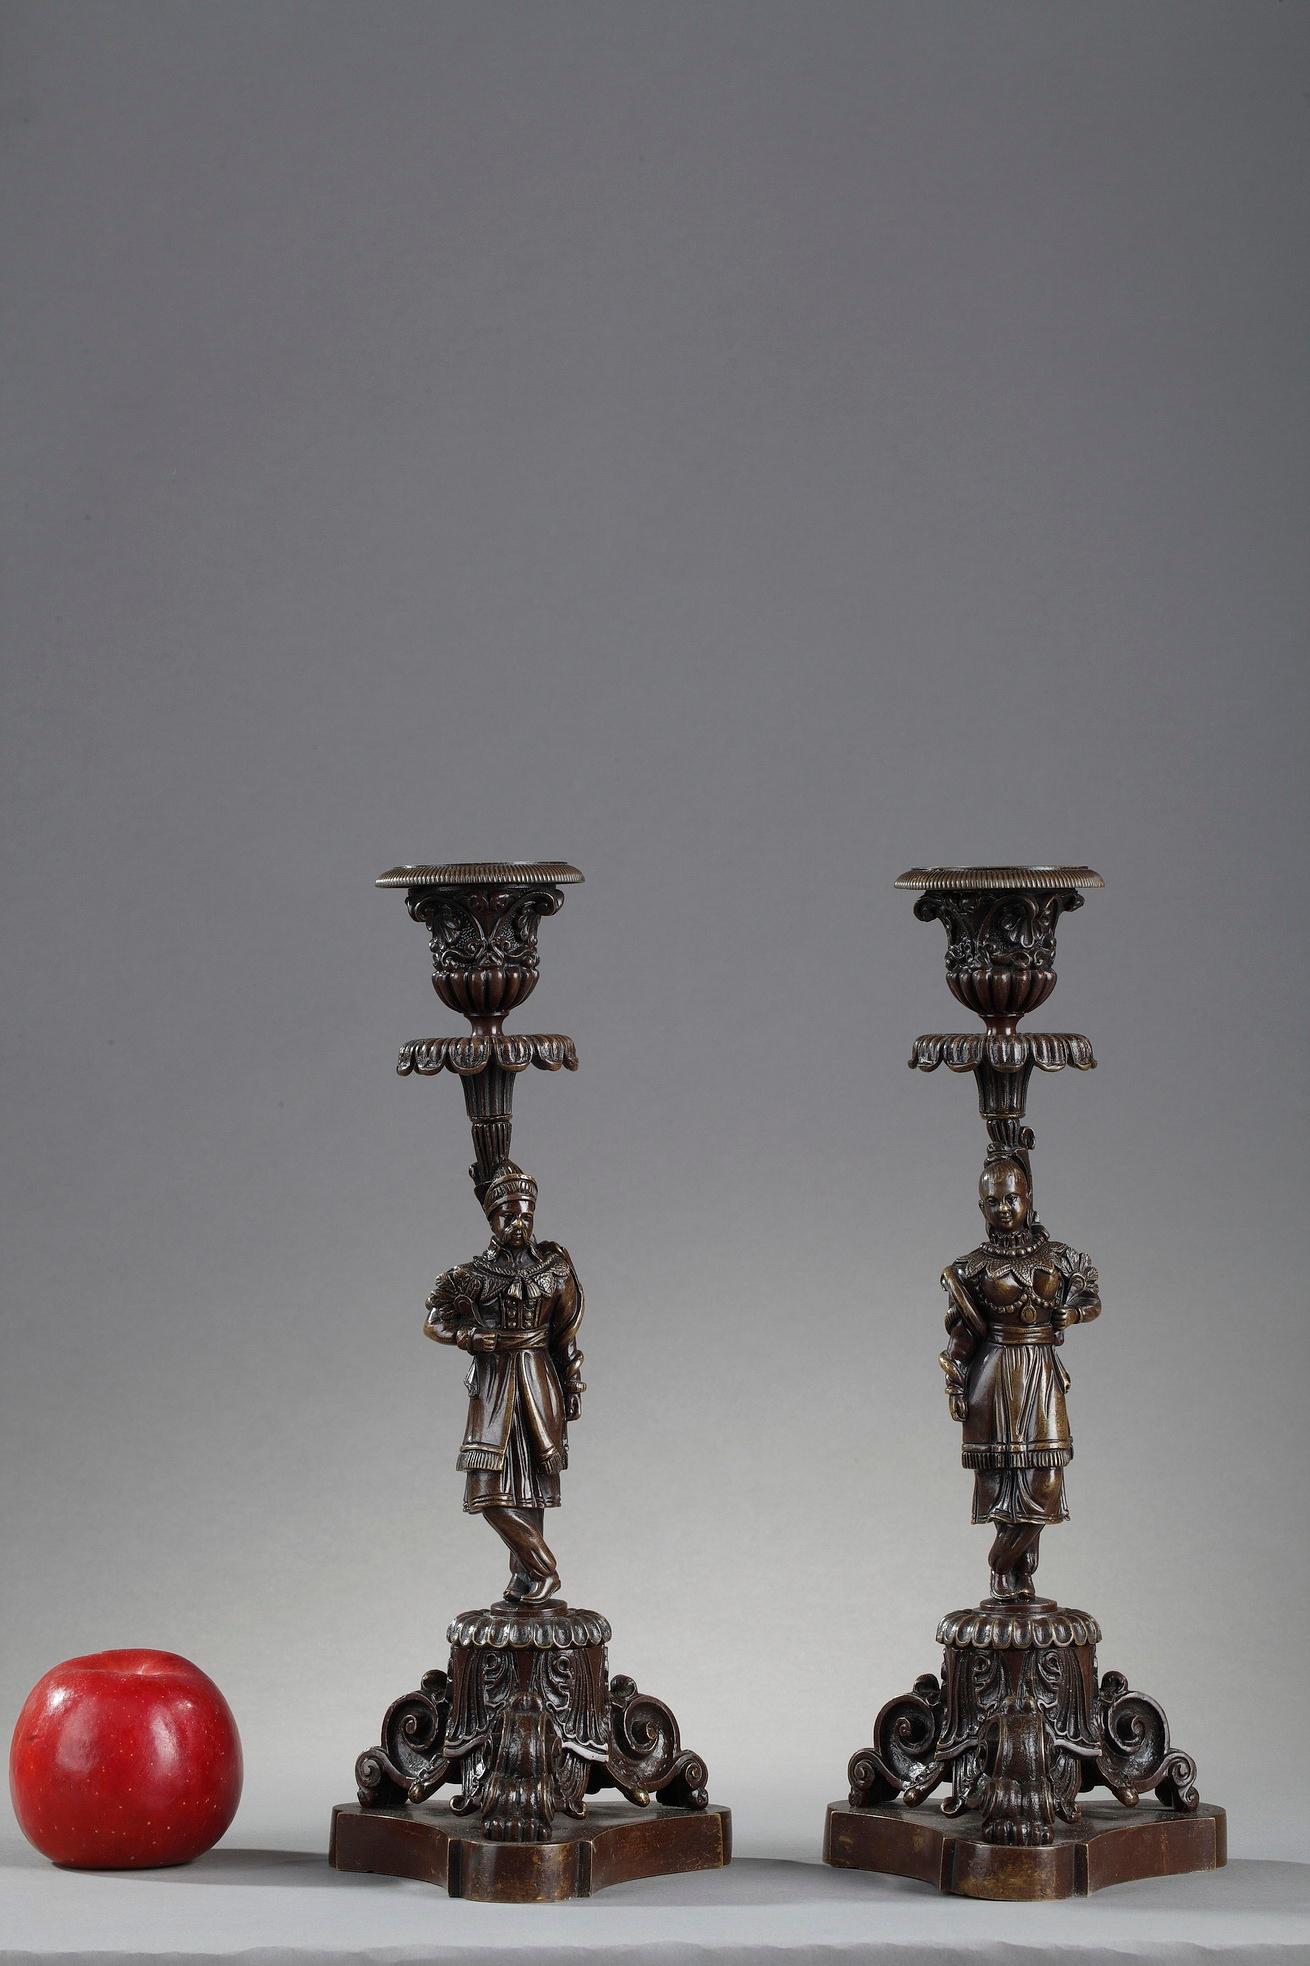 Late 19th century candlesticks crafted of patinated bronze, the stem decorated with Chinese. The man and the woman, elegantly dressed, rest on a tripod base. The base and the nozzle are ornamented with intricately detailed scrolls and